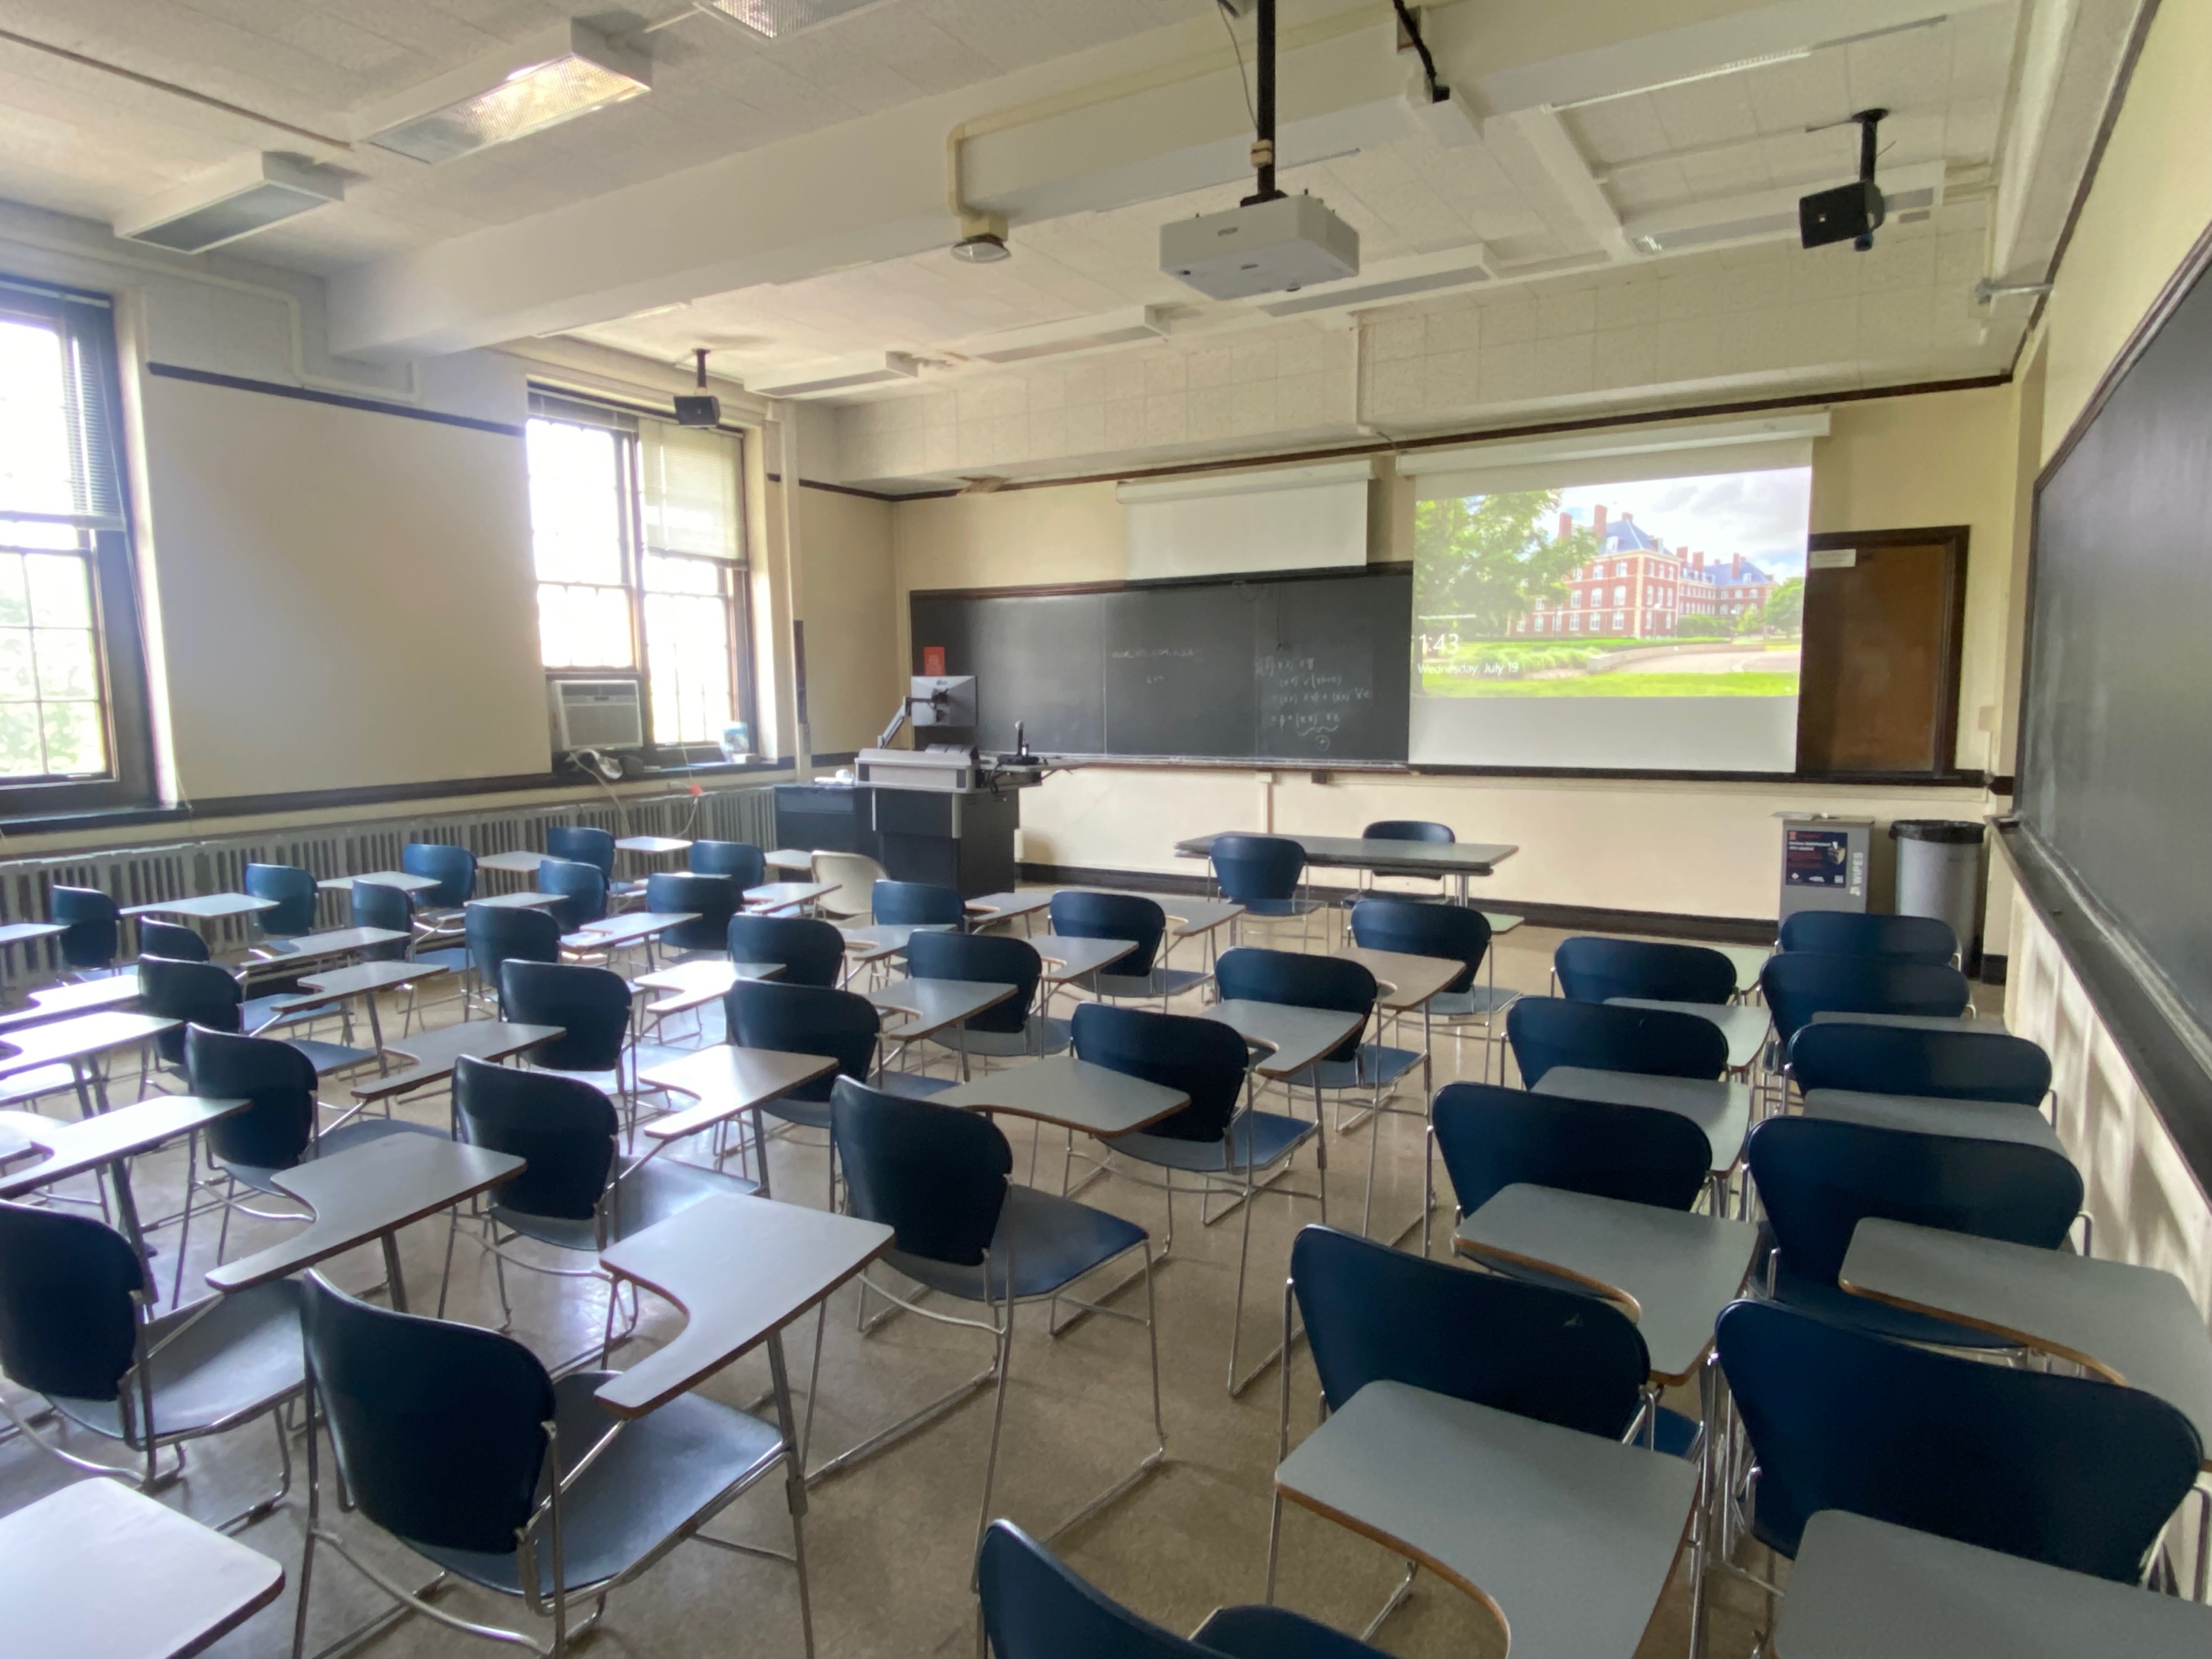 A view of the classroom with Moveable Tableted Arm Chairs, projector and screen, chalkboard, instructor lectern, and instructor table in front.